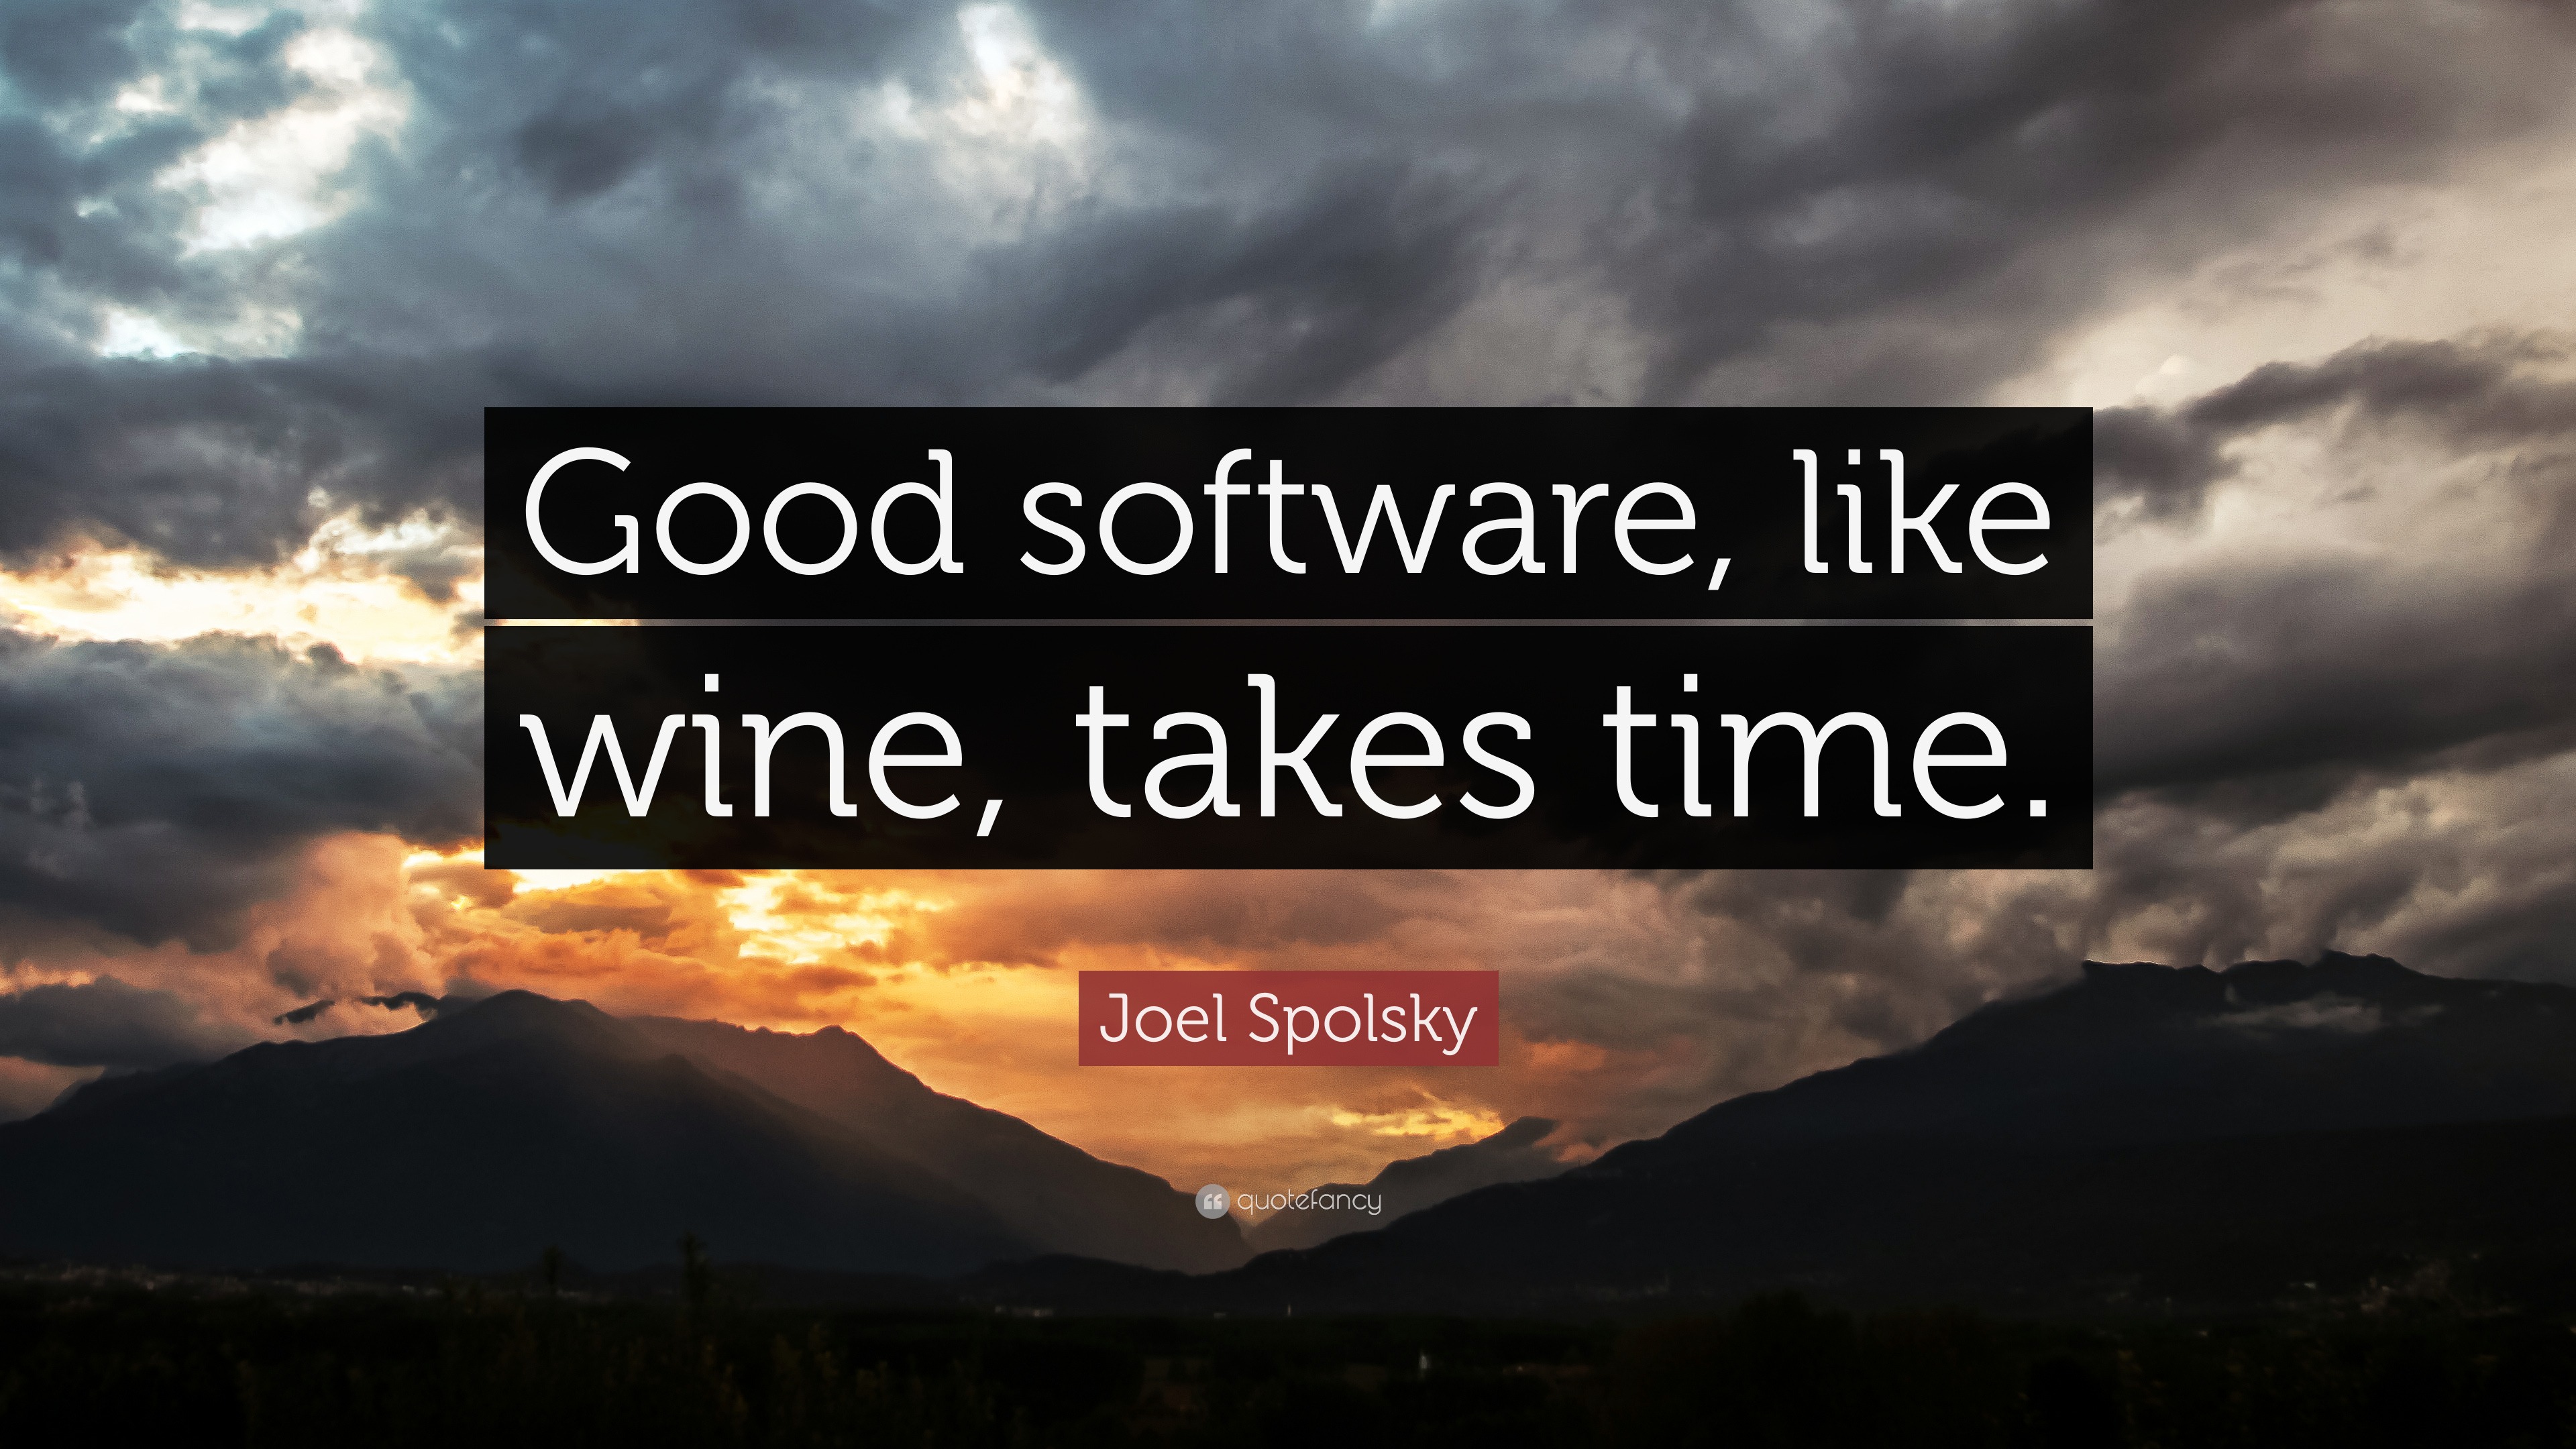 Joel Spolsky Quote “Good software like wine takes time ”